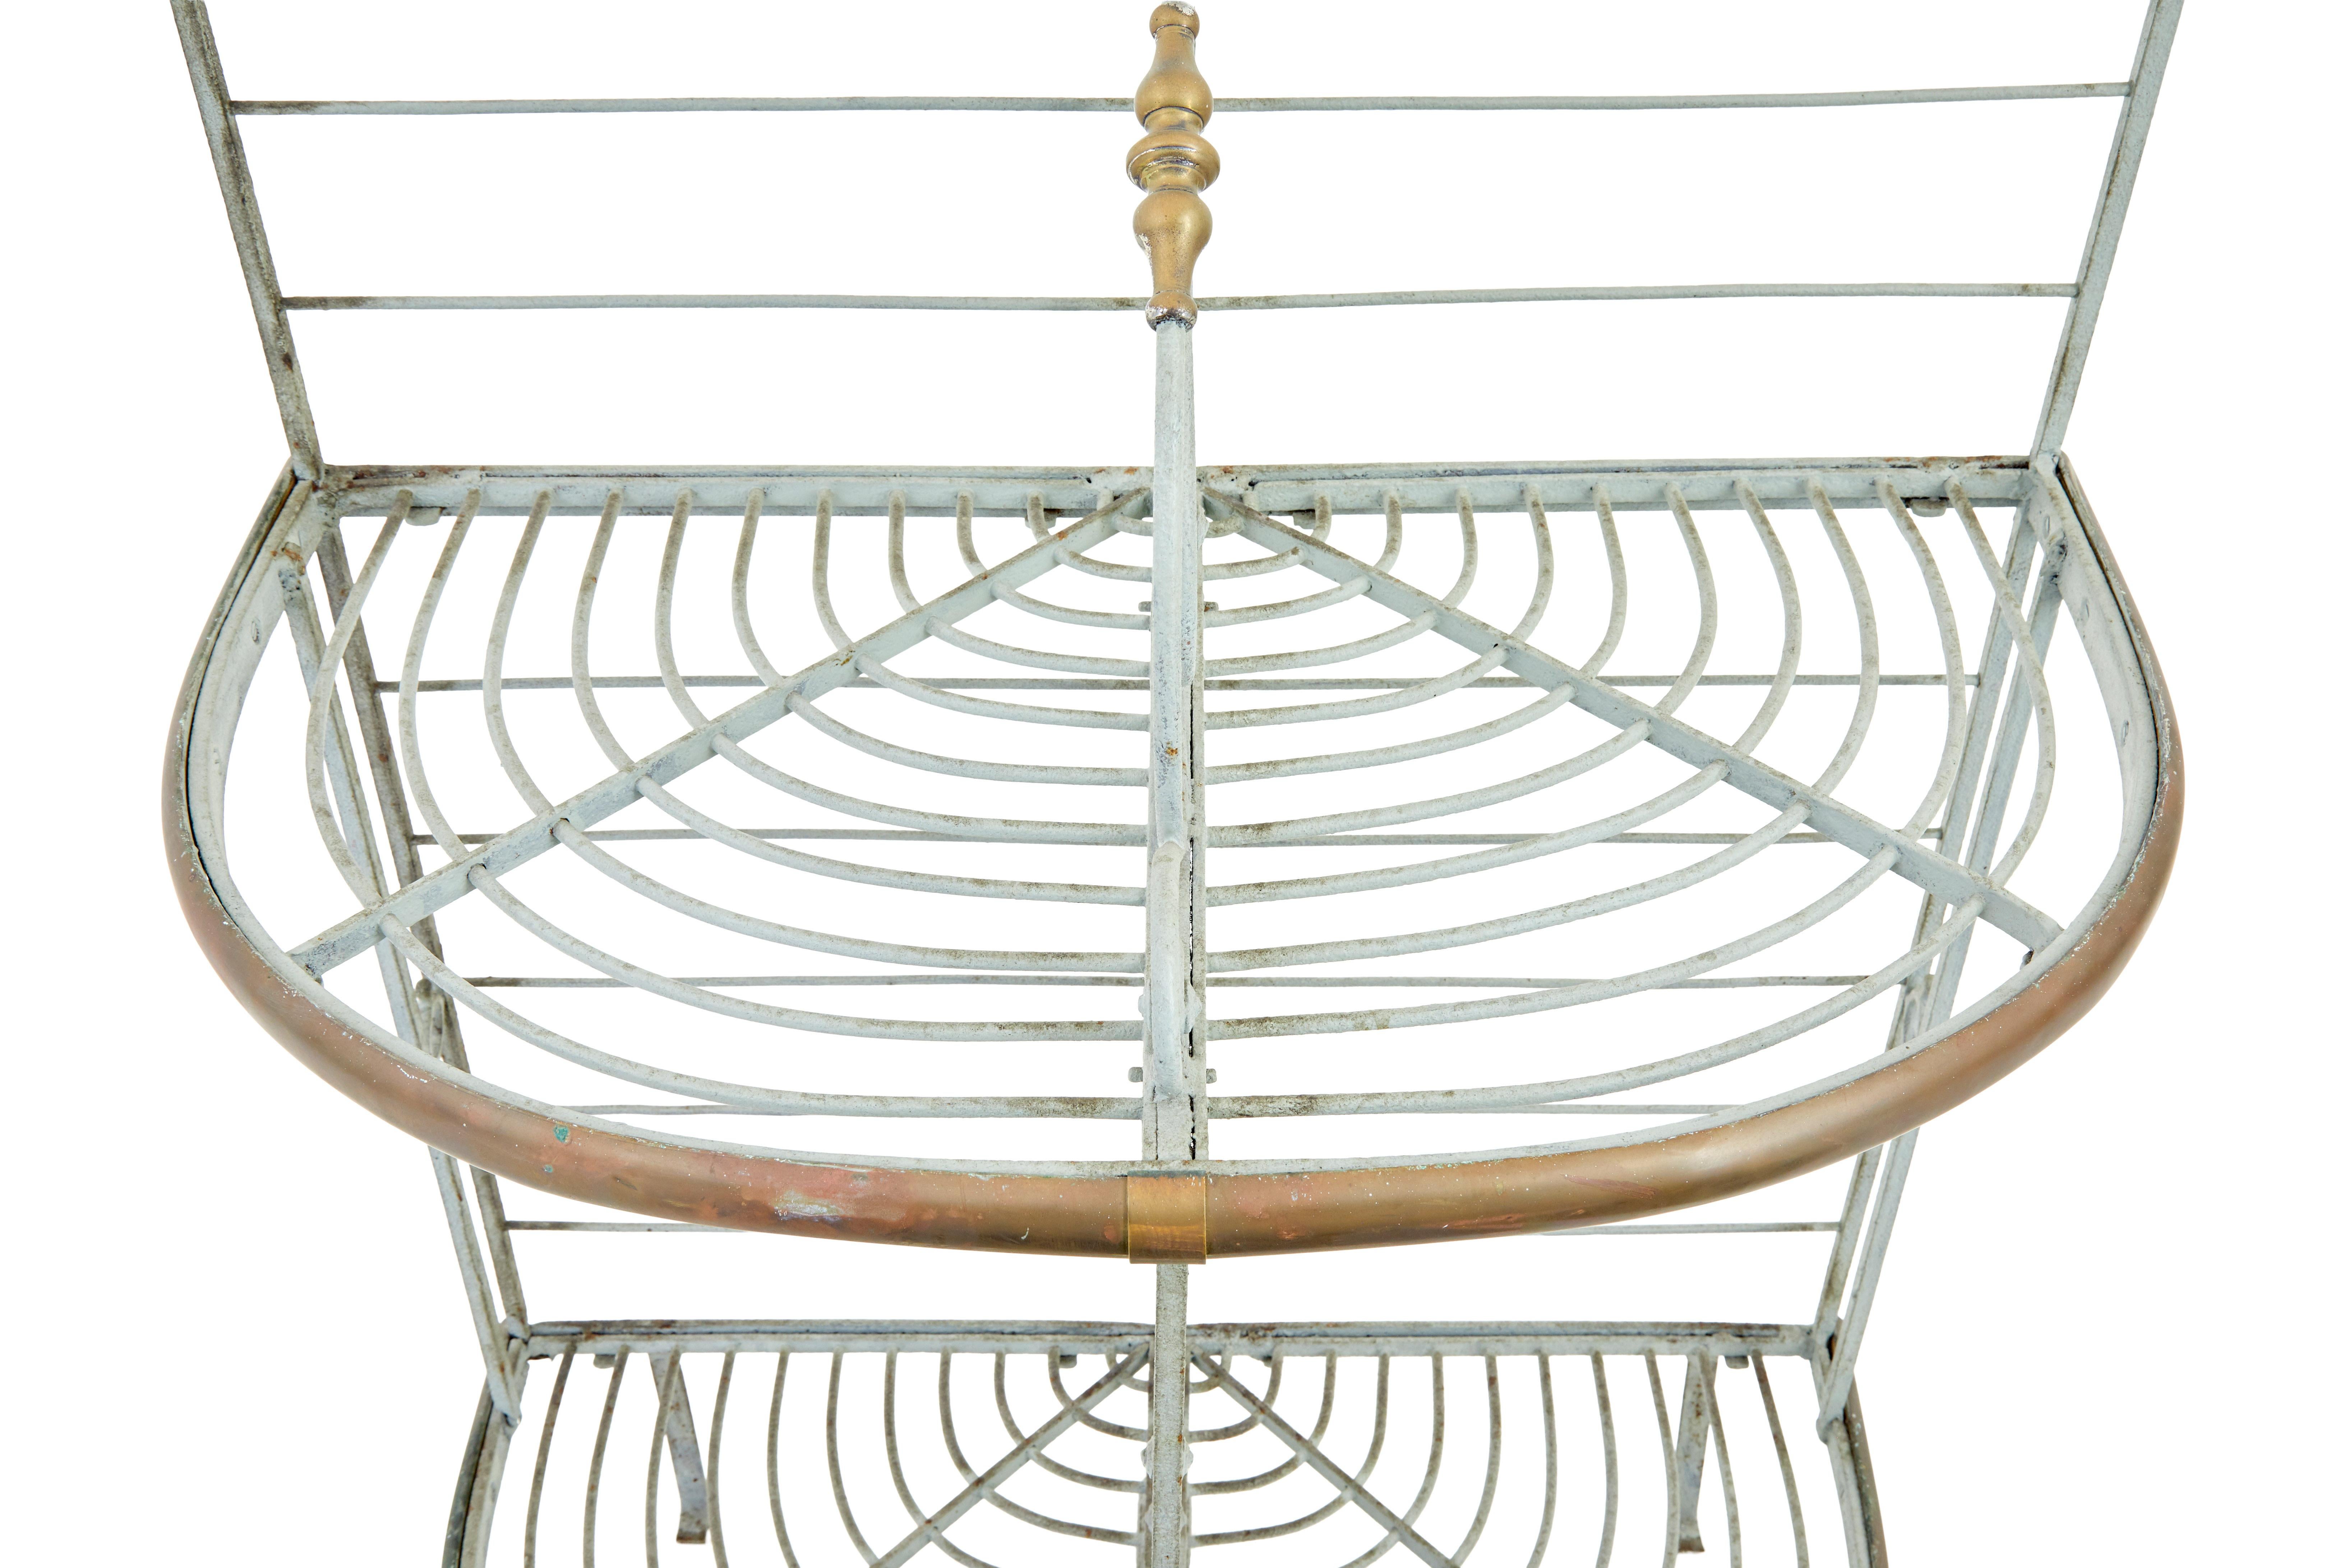 Early 20th century French Parisienne boulangers bread rack For Sale 1